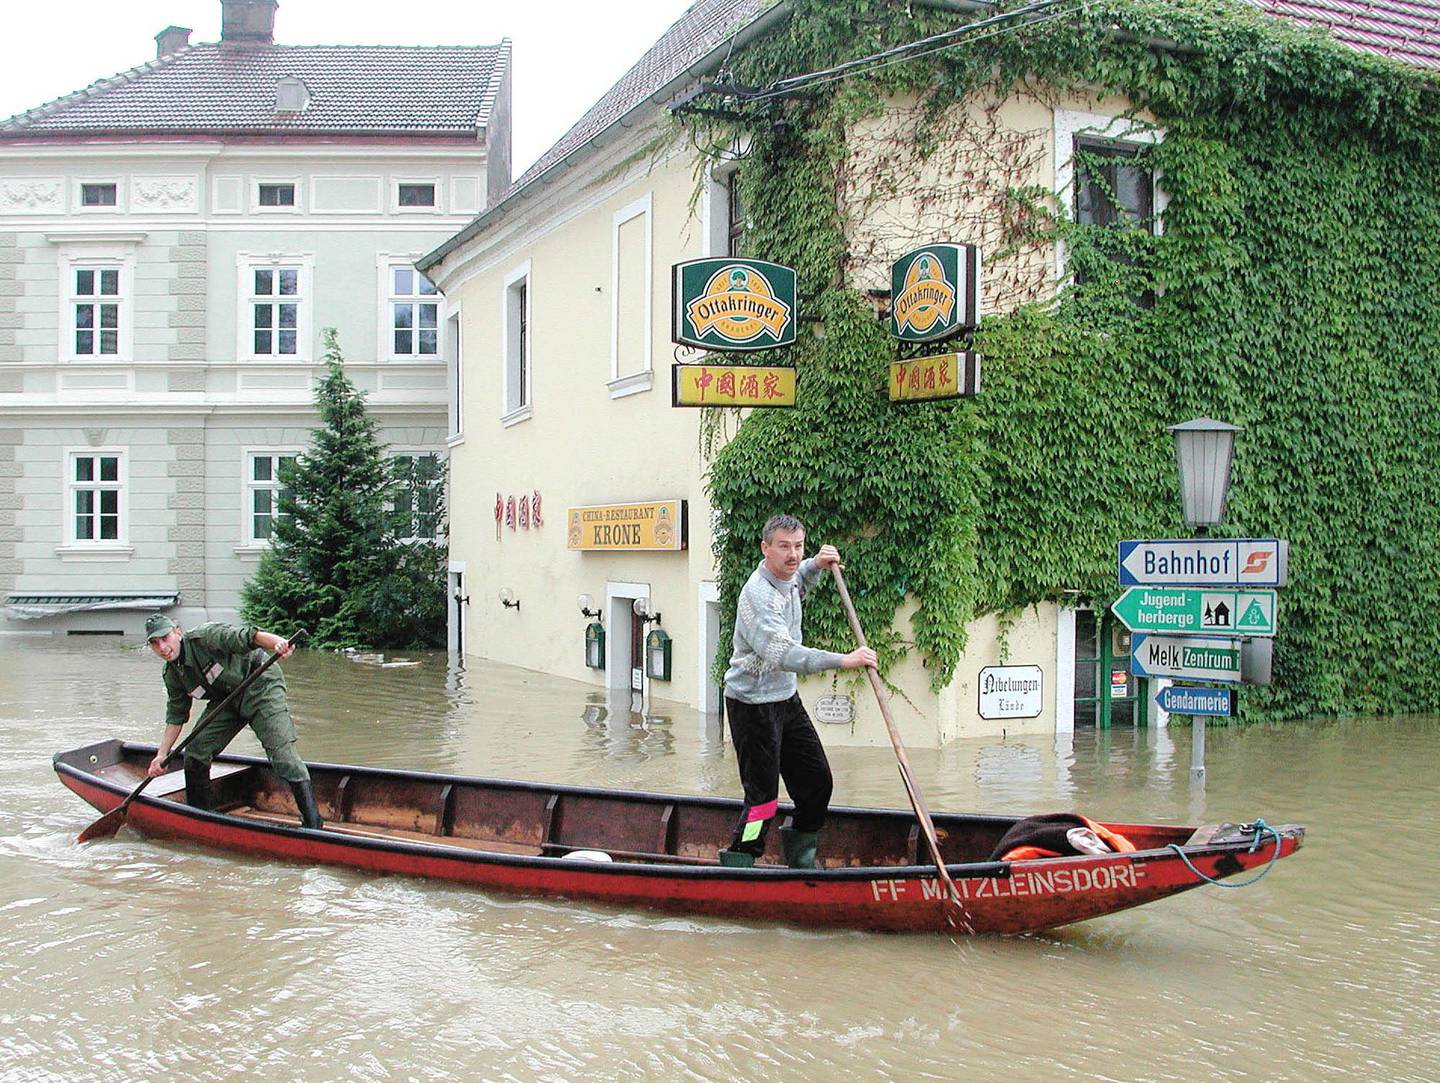 
Firefighters steer their boat past a flooded Chinese restaurant in the city of Melk in the Austrian province of Lower Austria, some 90 kilometers west of Vienna, which was flooded by Danube River on Tuesday, Aug. 13, 2002. (AP Photo/Paul Plutsch)